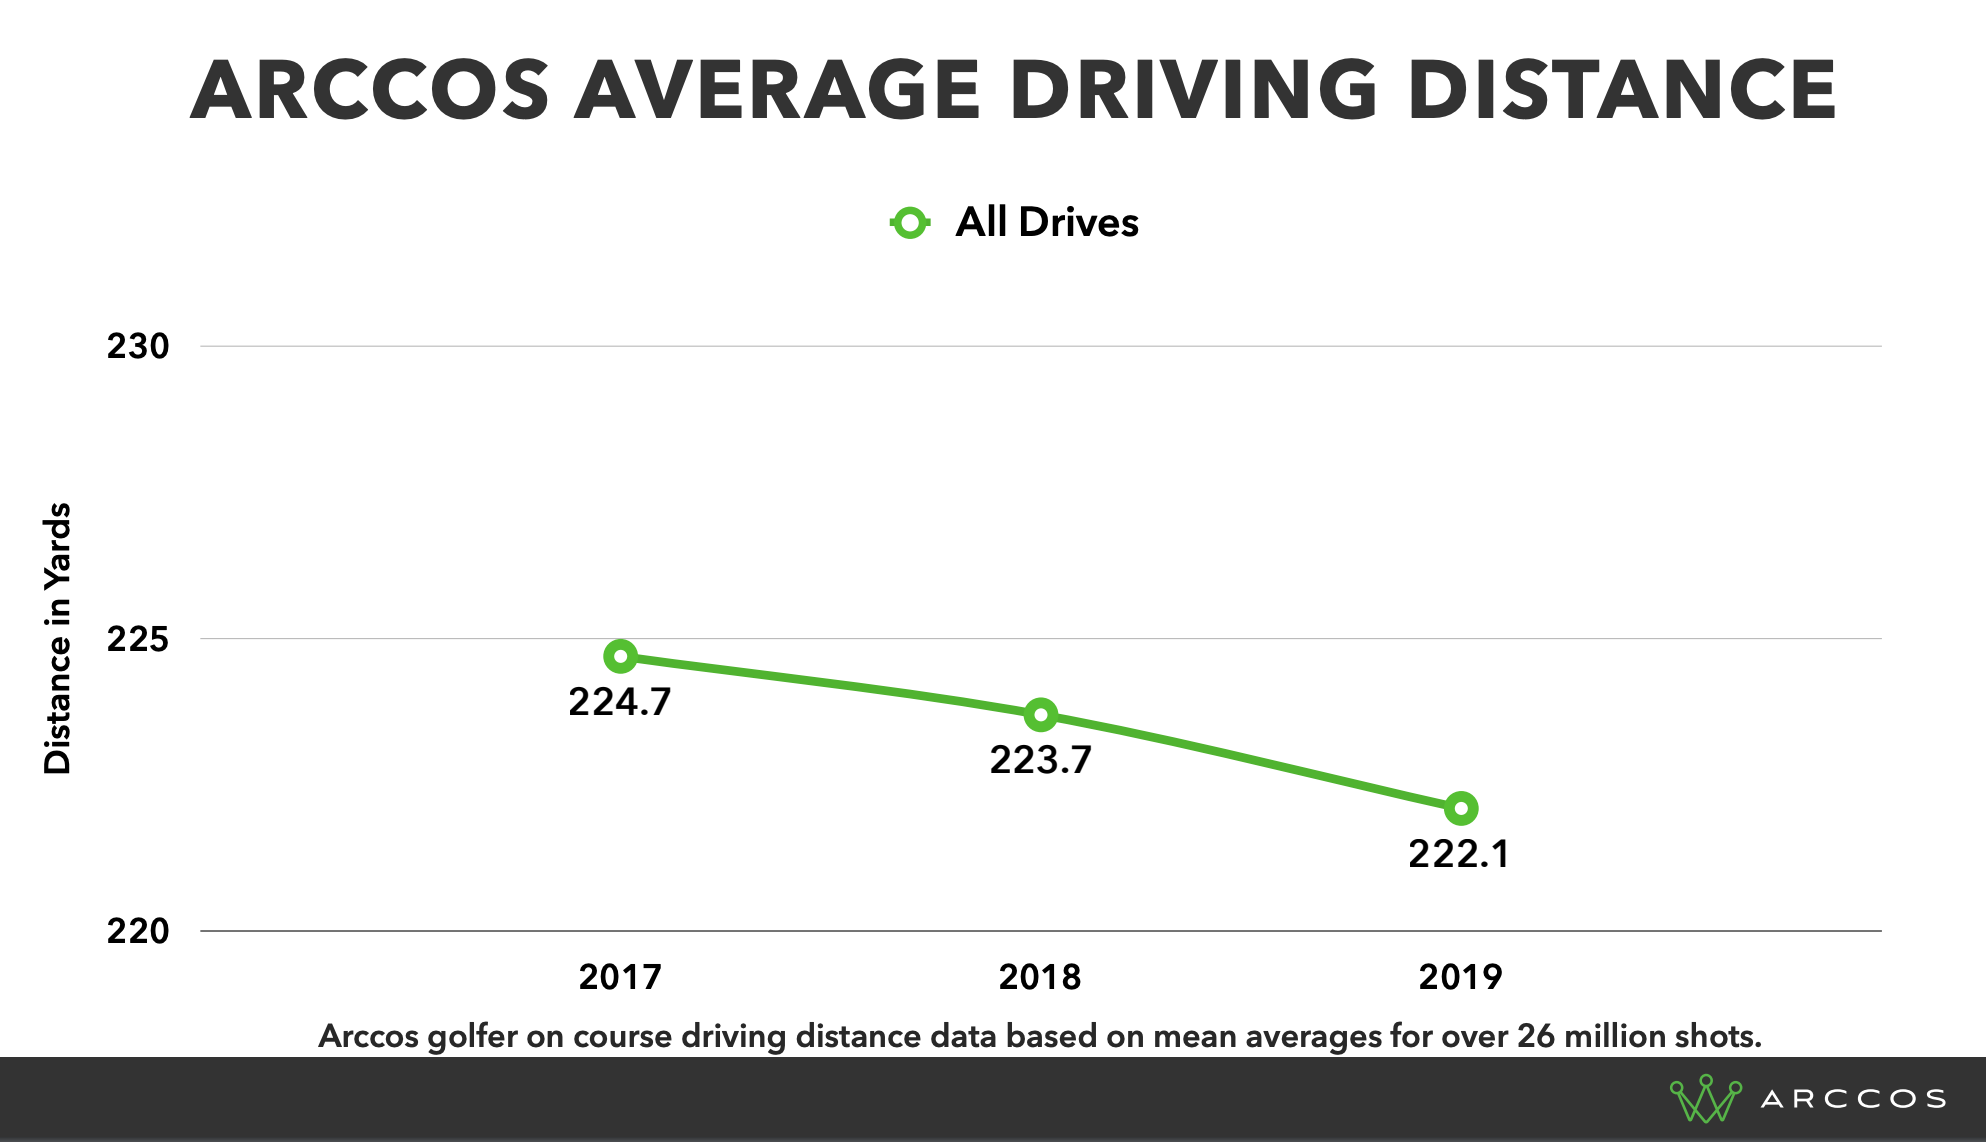 Average Driving Distance for Amateur Golfer Arccos Users